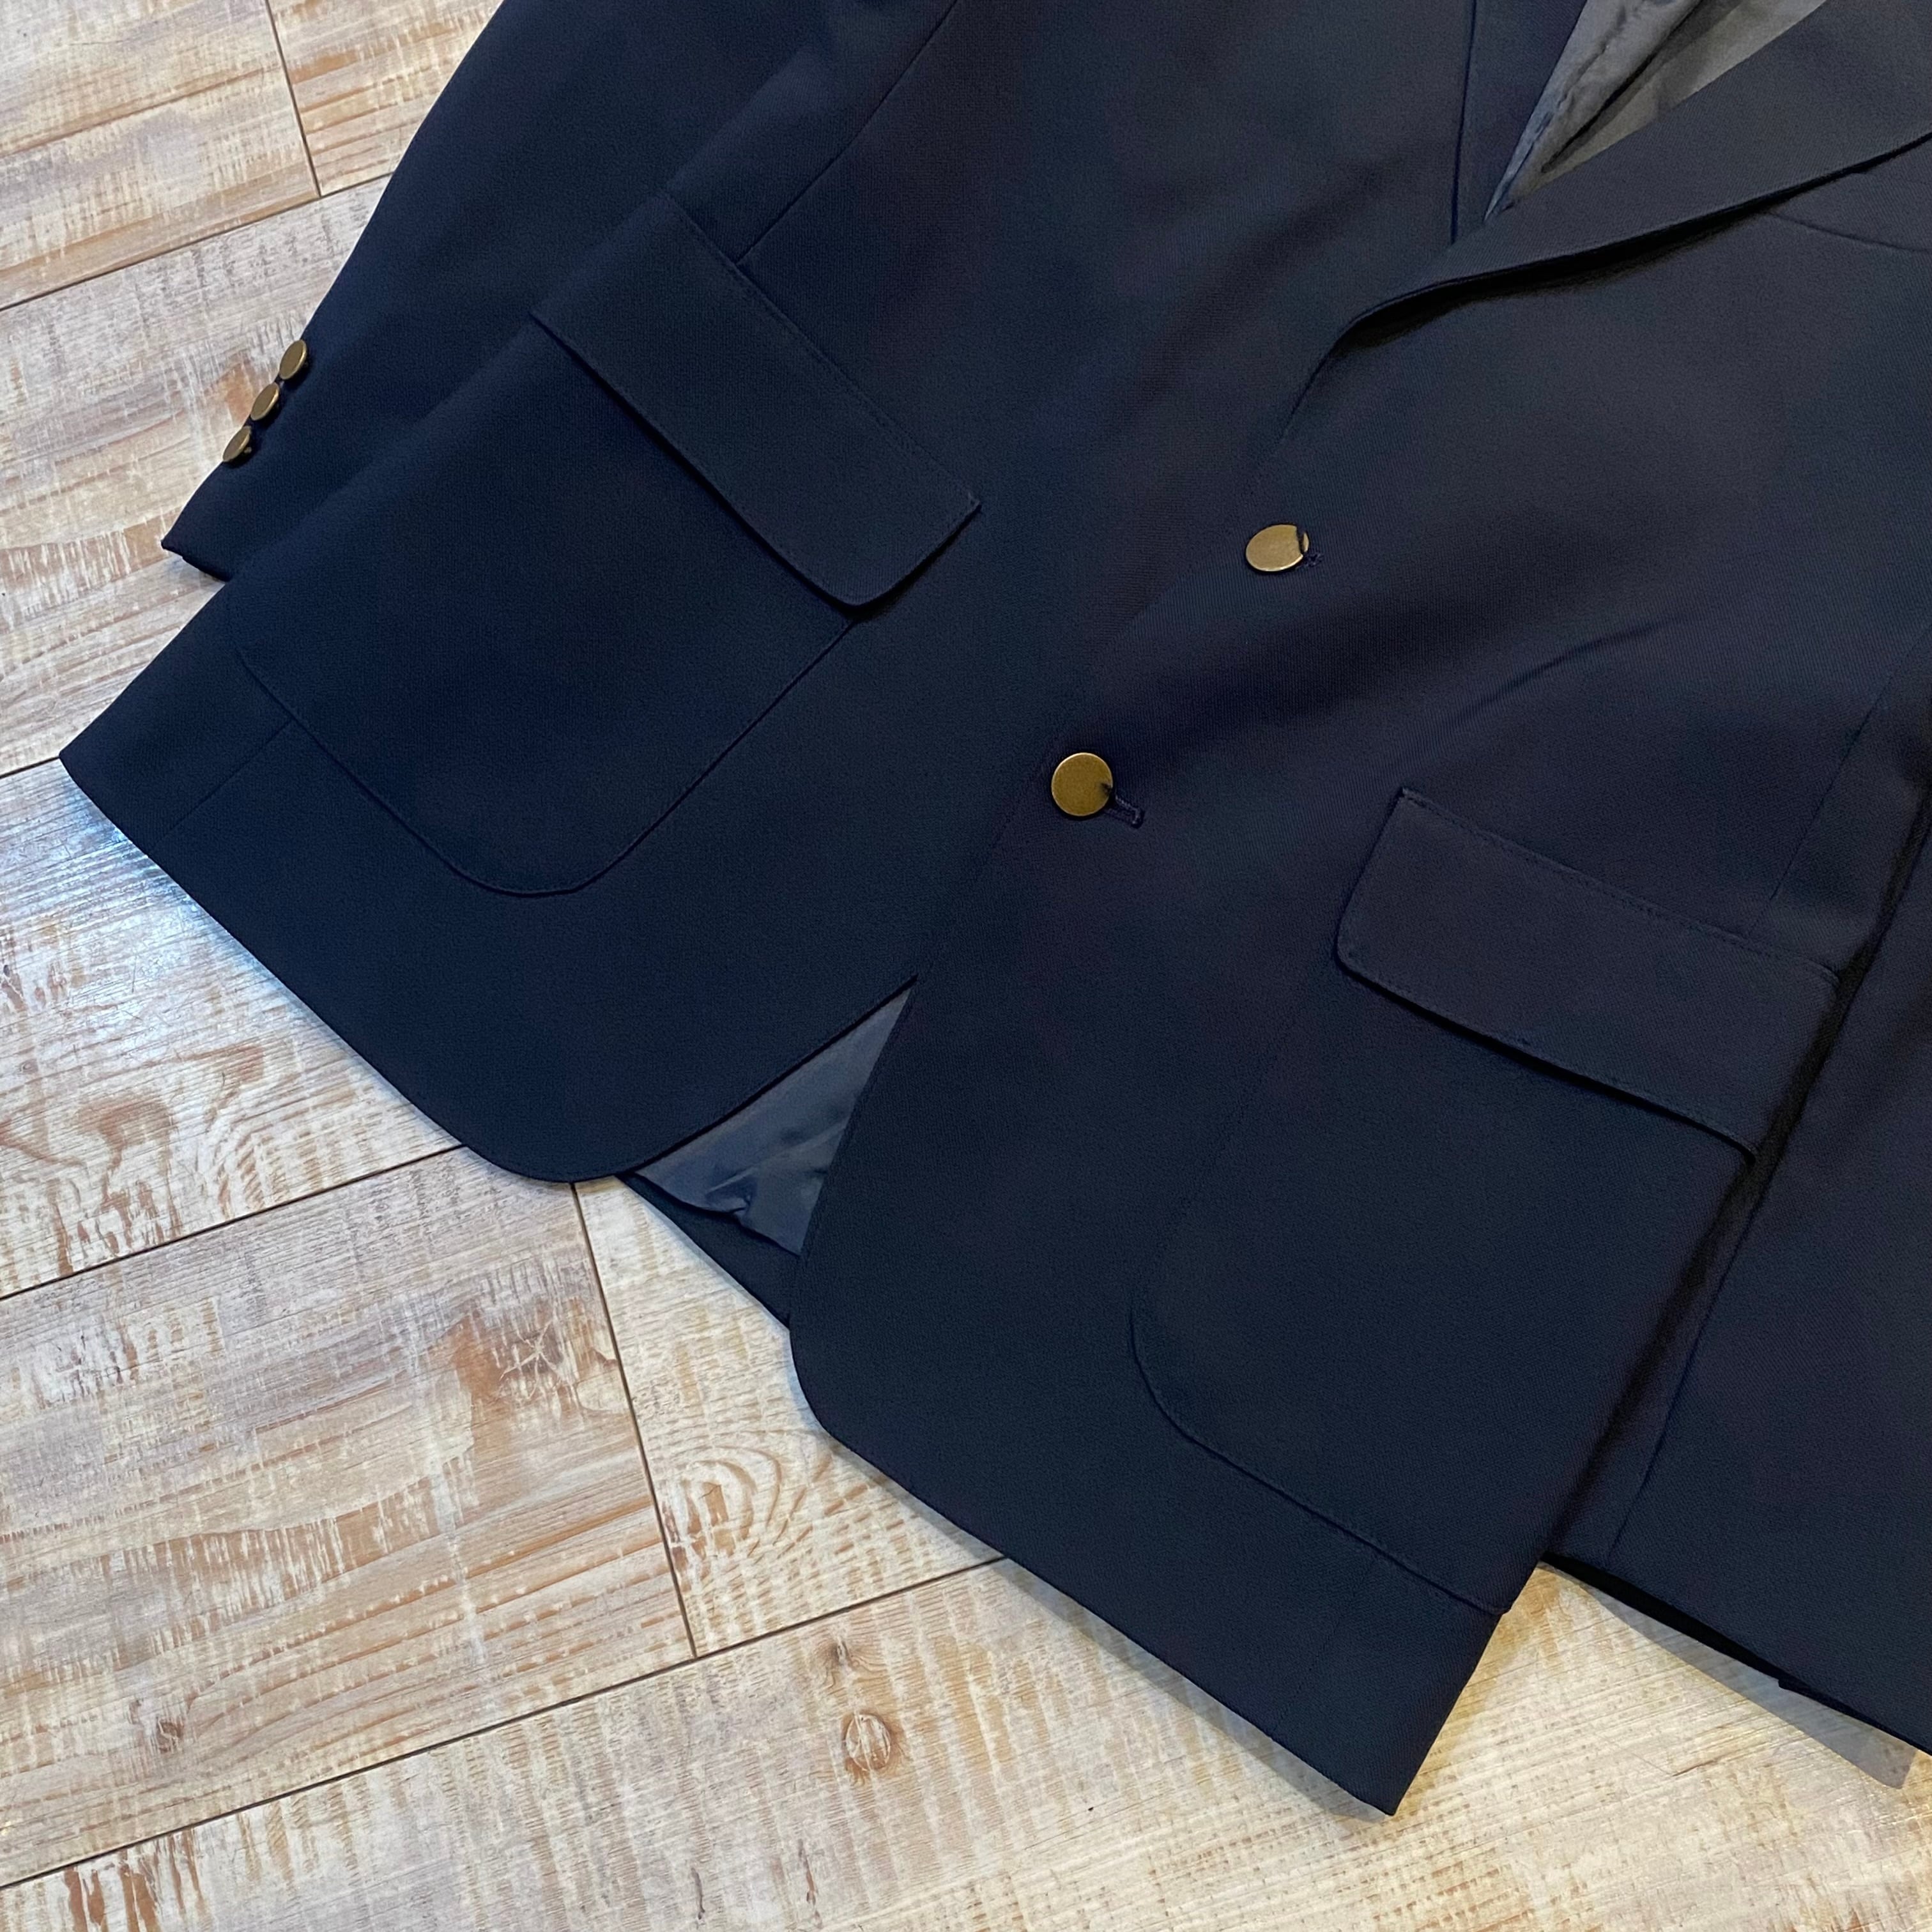 Levi´s ACTION SUIT Jacket Navy 1980s 42R Vintage リーバイス